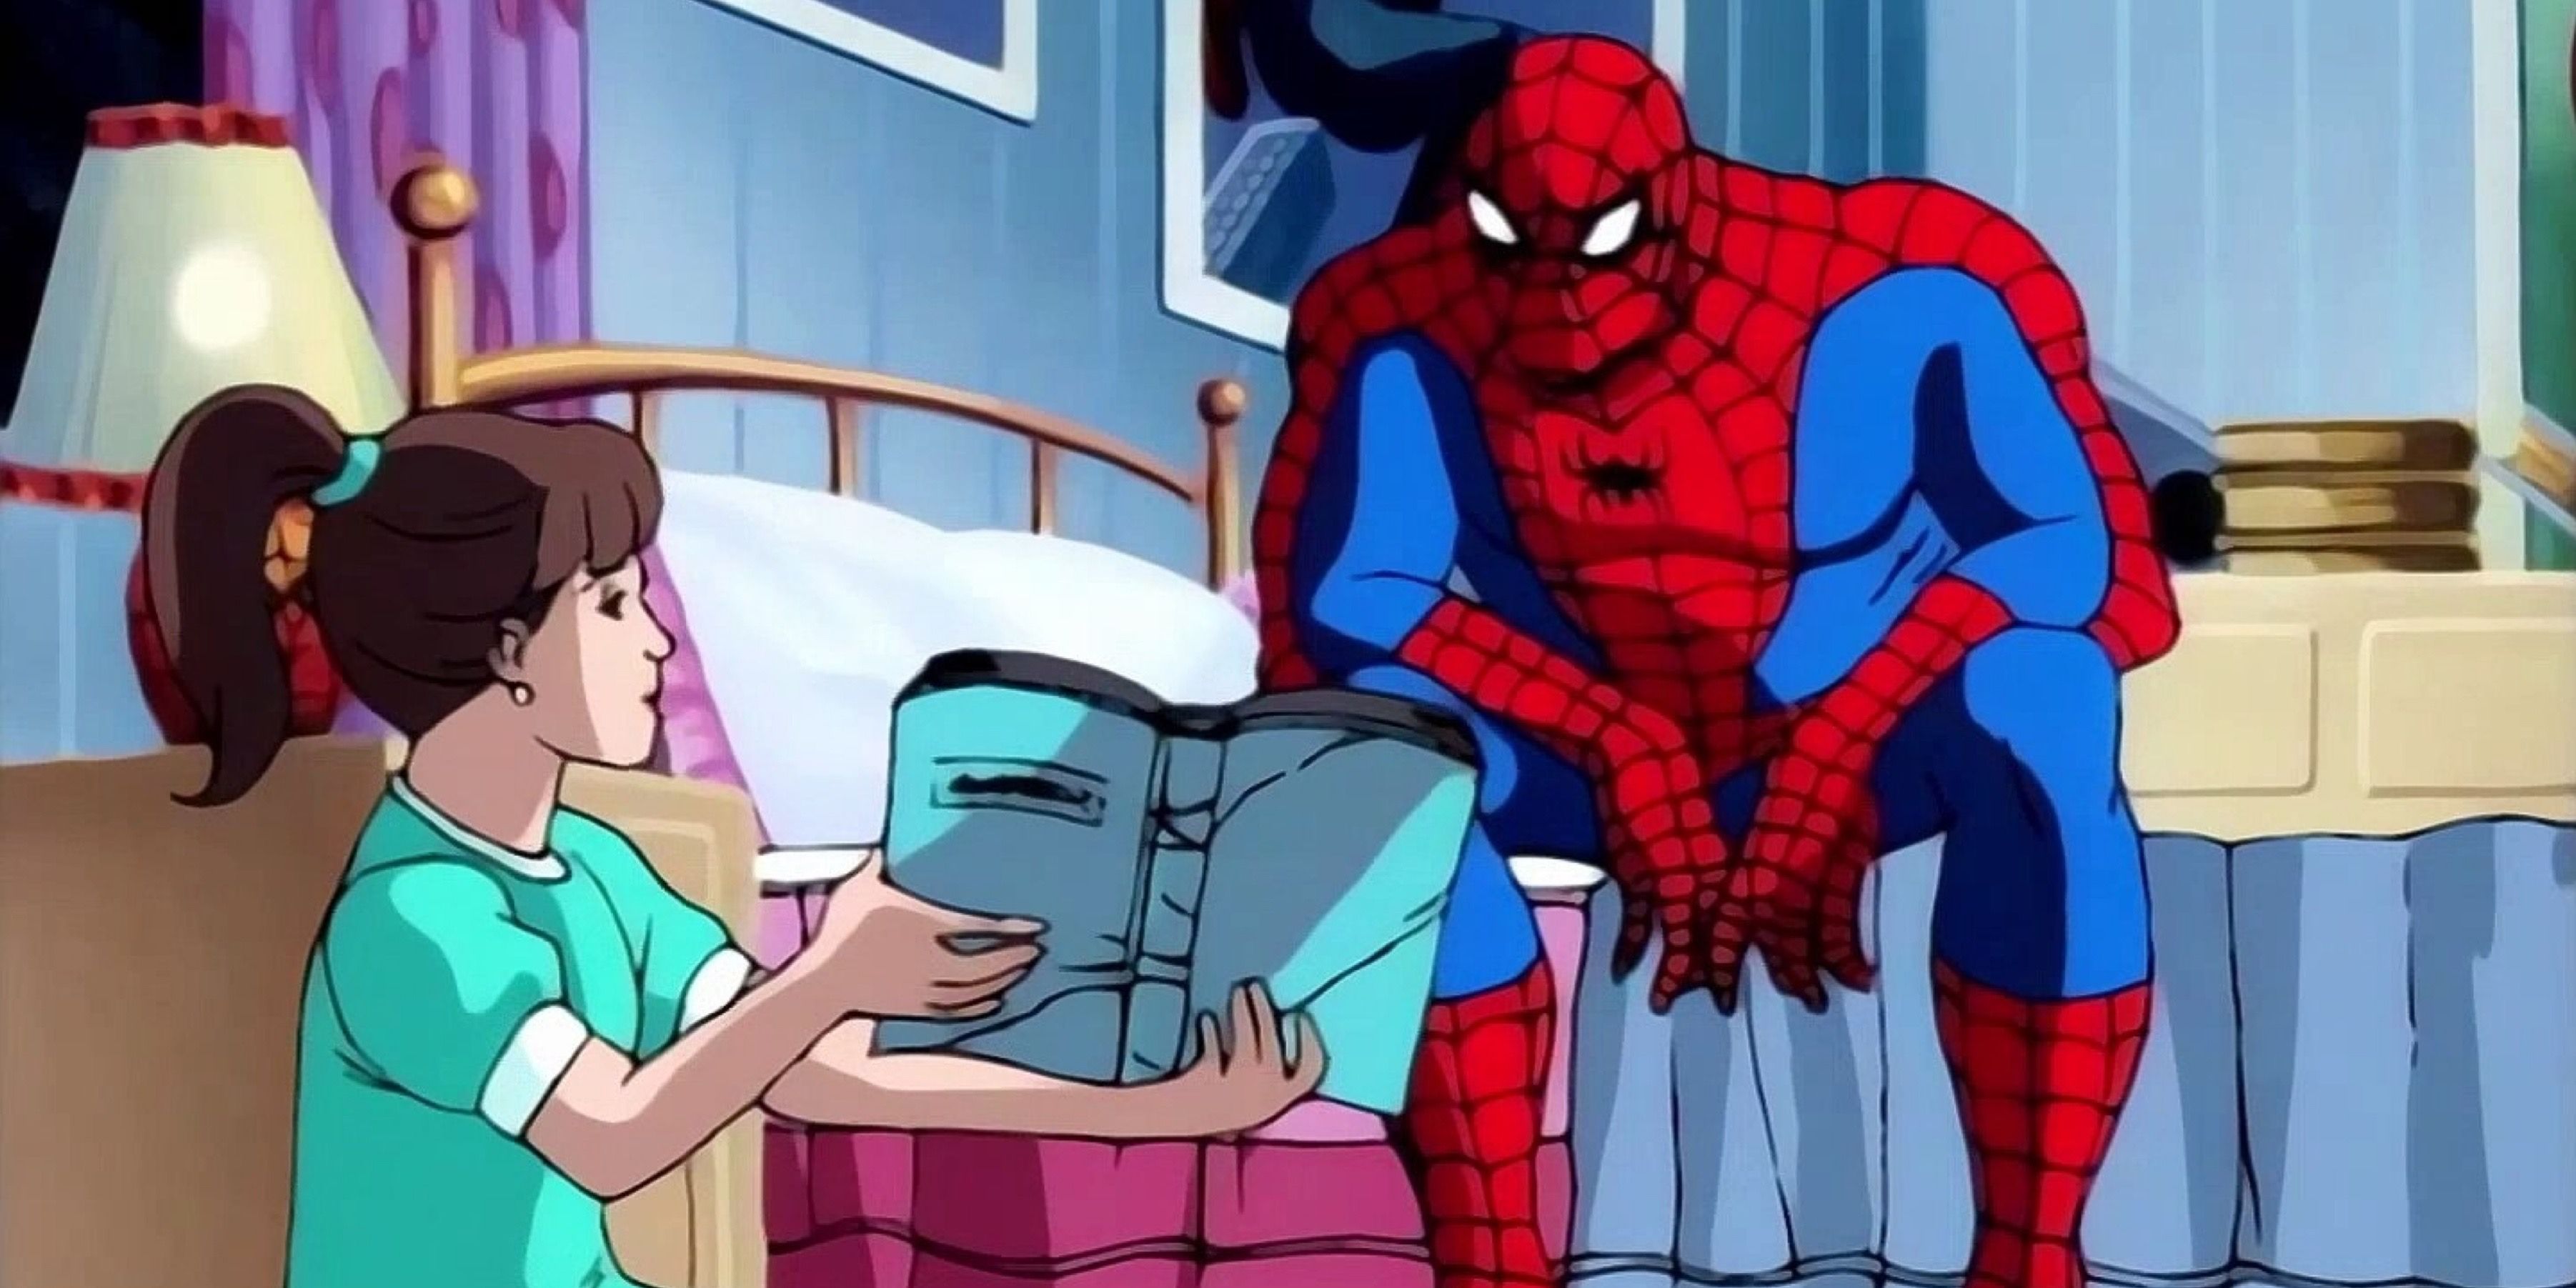 Spider-Man from 90s animated series, Make a Wish episode